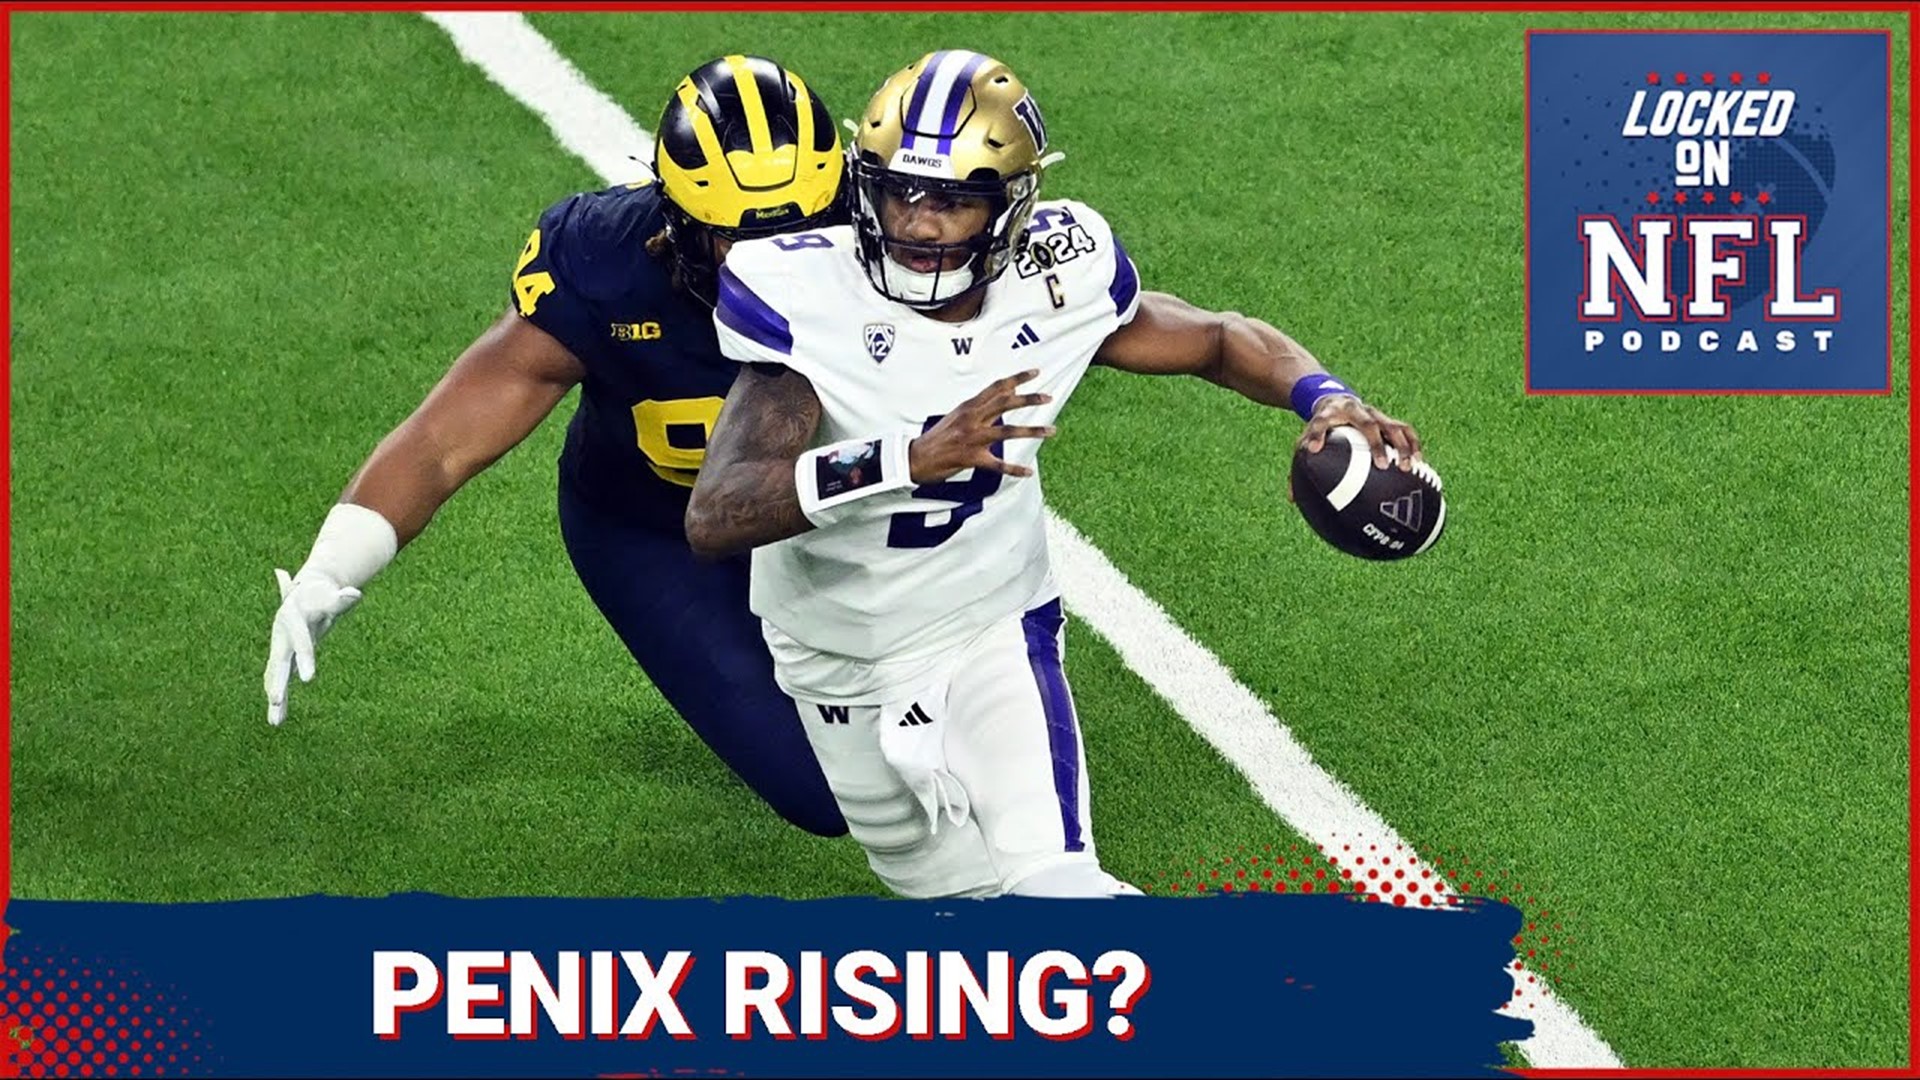 Washington QB Michael Penix Jr. is not a first round QB - or is he? Are the Minnesota Vikings, New England Patriots or New York Giants thinking outside the box?